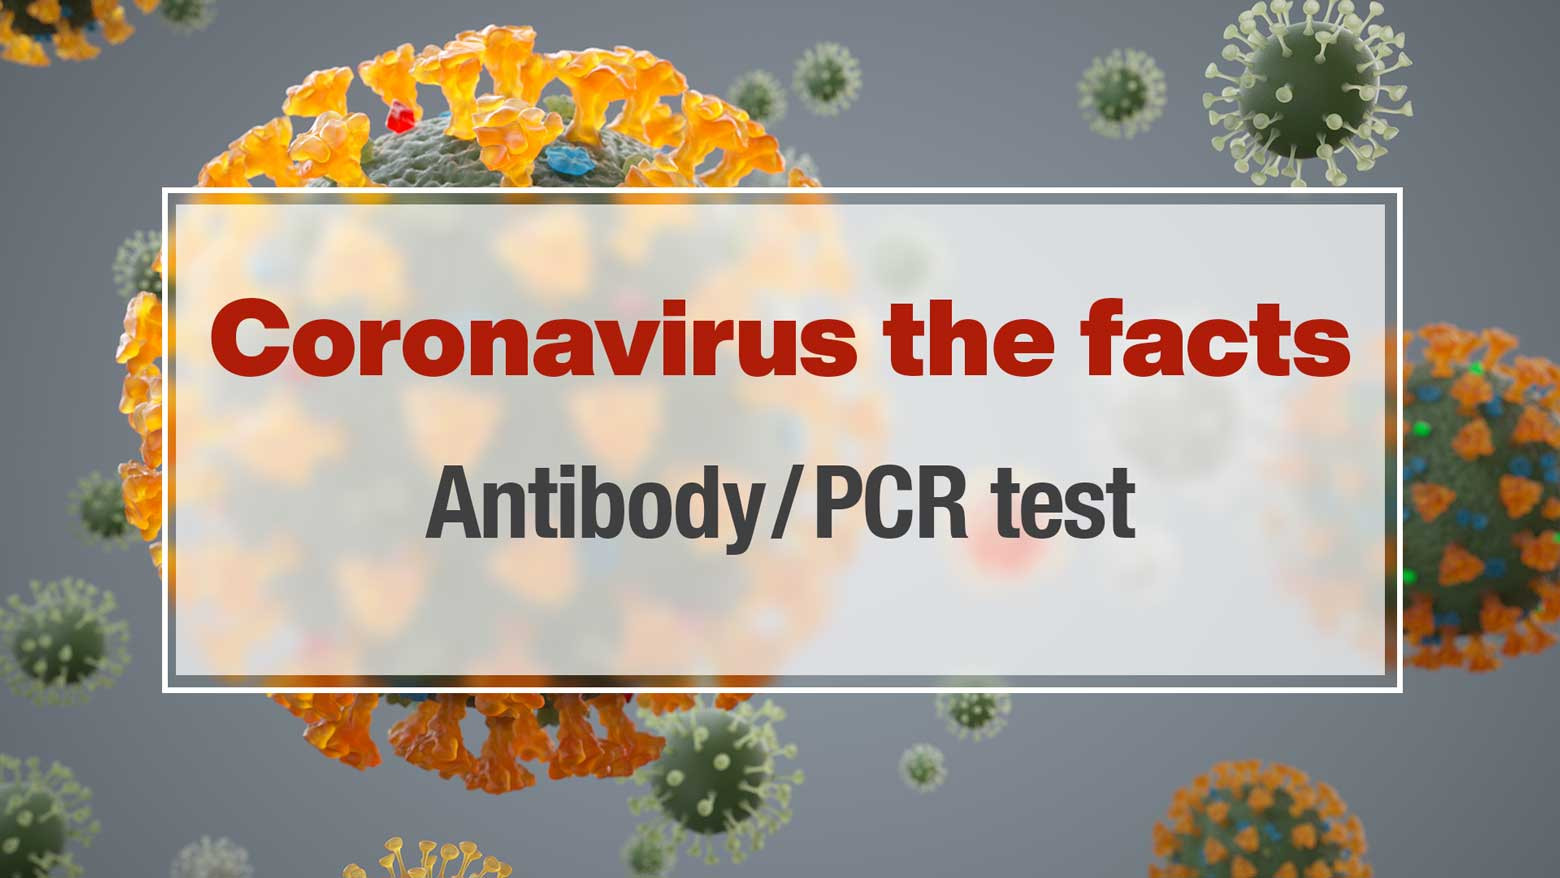 What is the relationship between PCR and antibody test results?